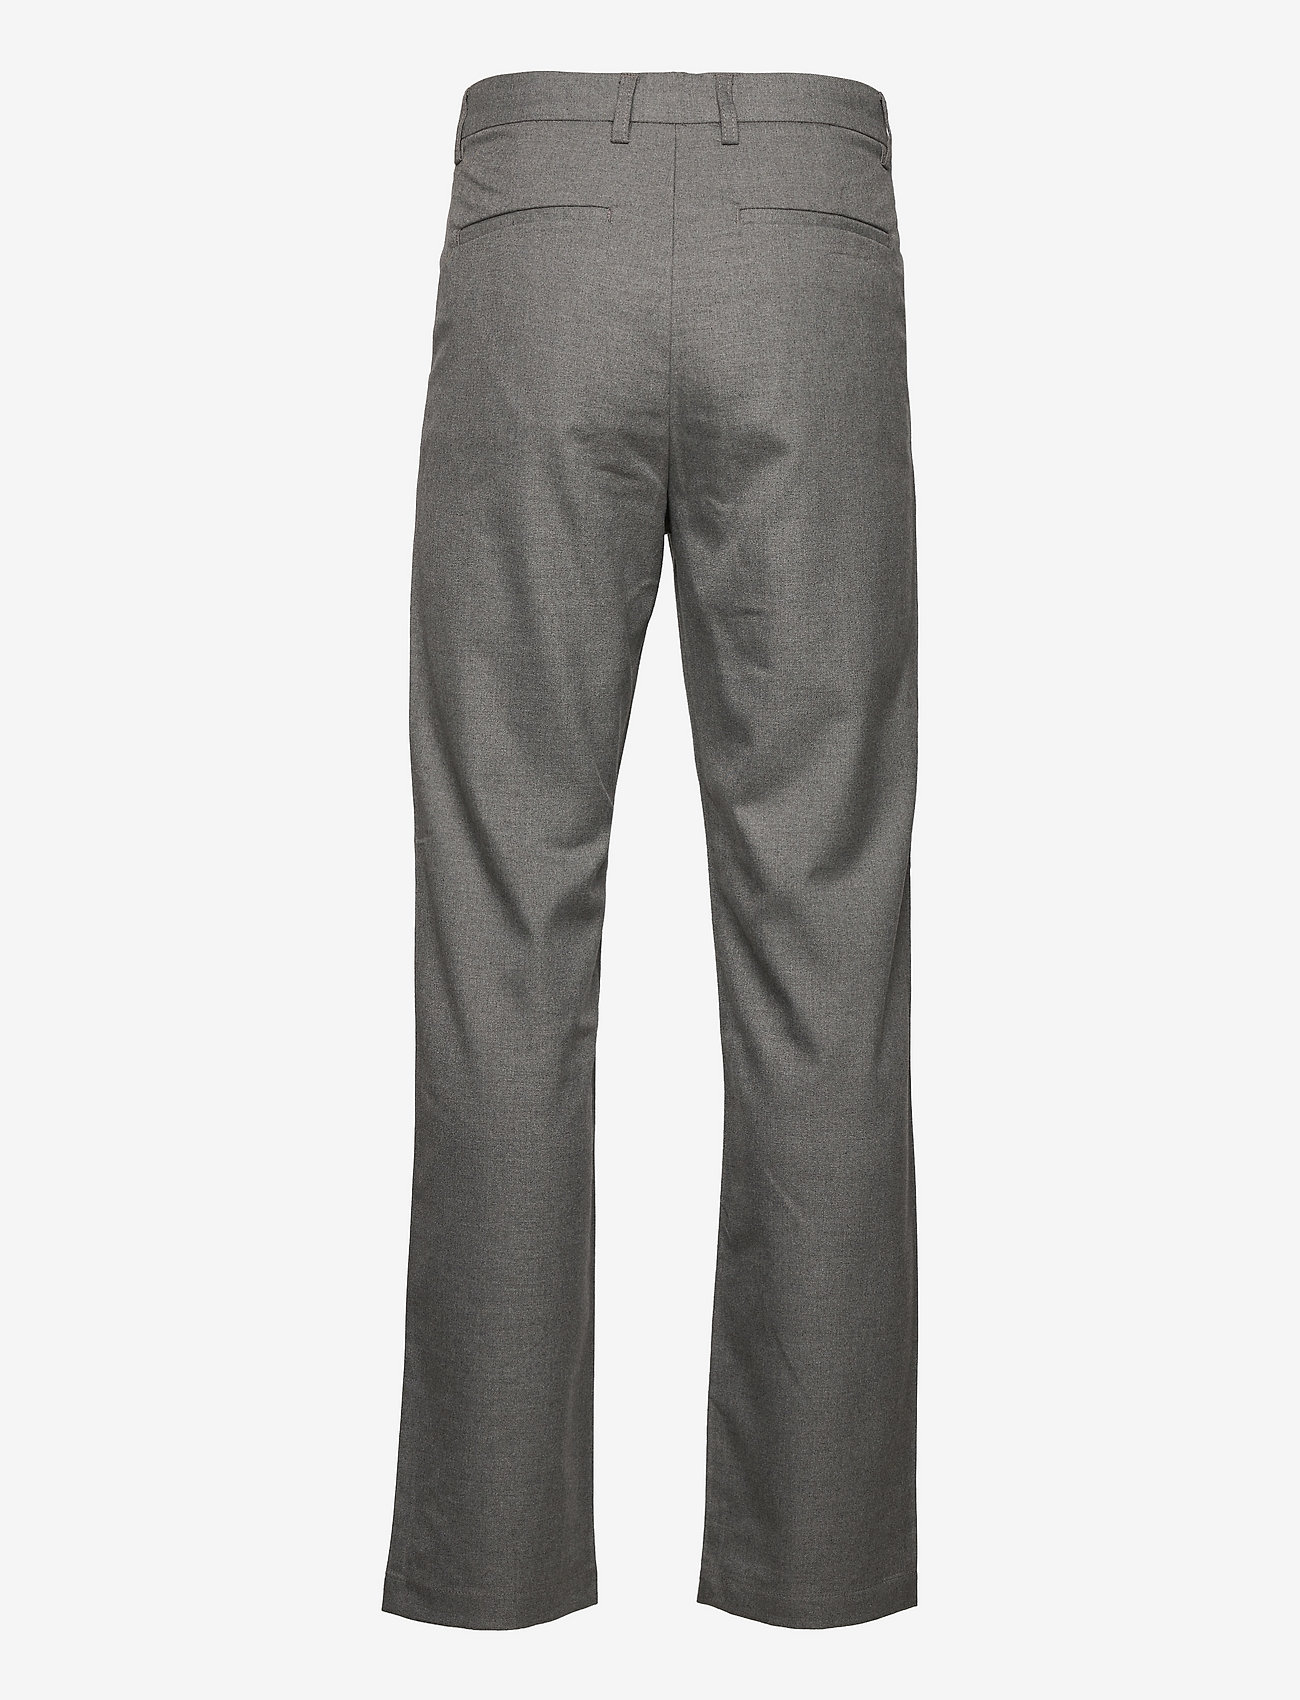 Just Junkies - Toya Bistretch - suit trousers - grey mell - 1